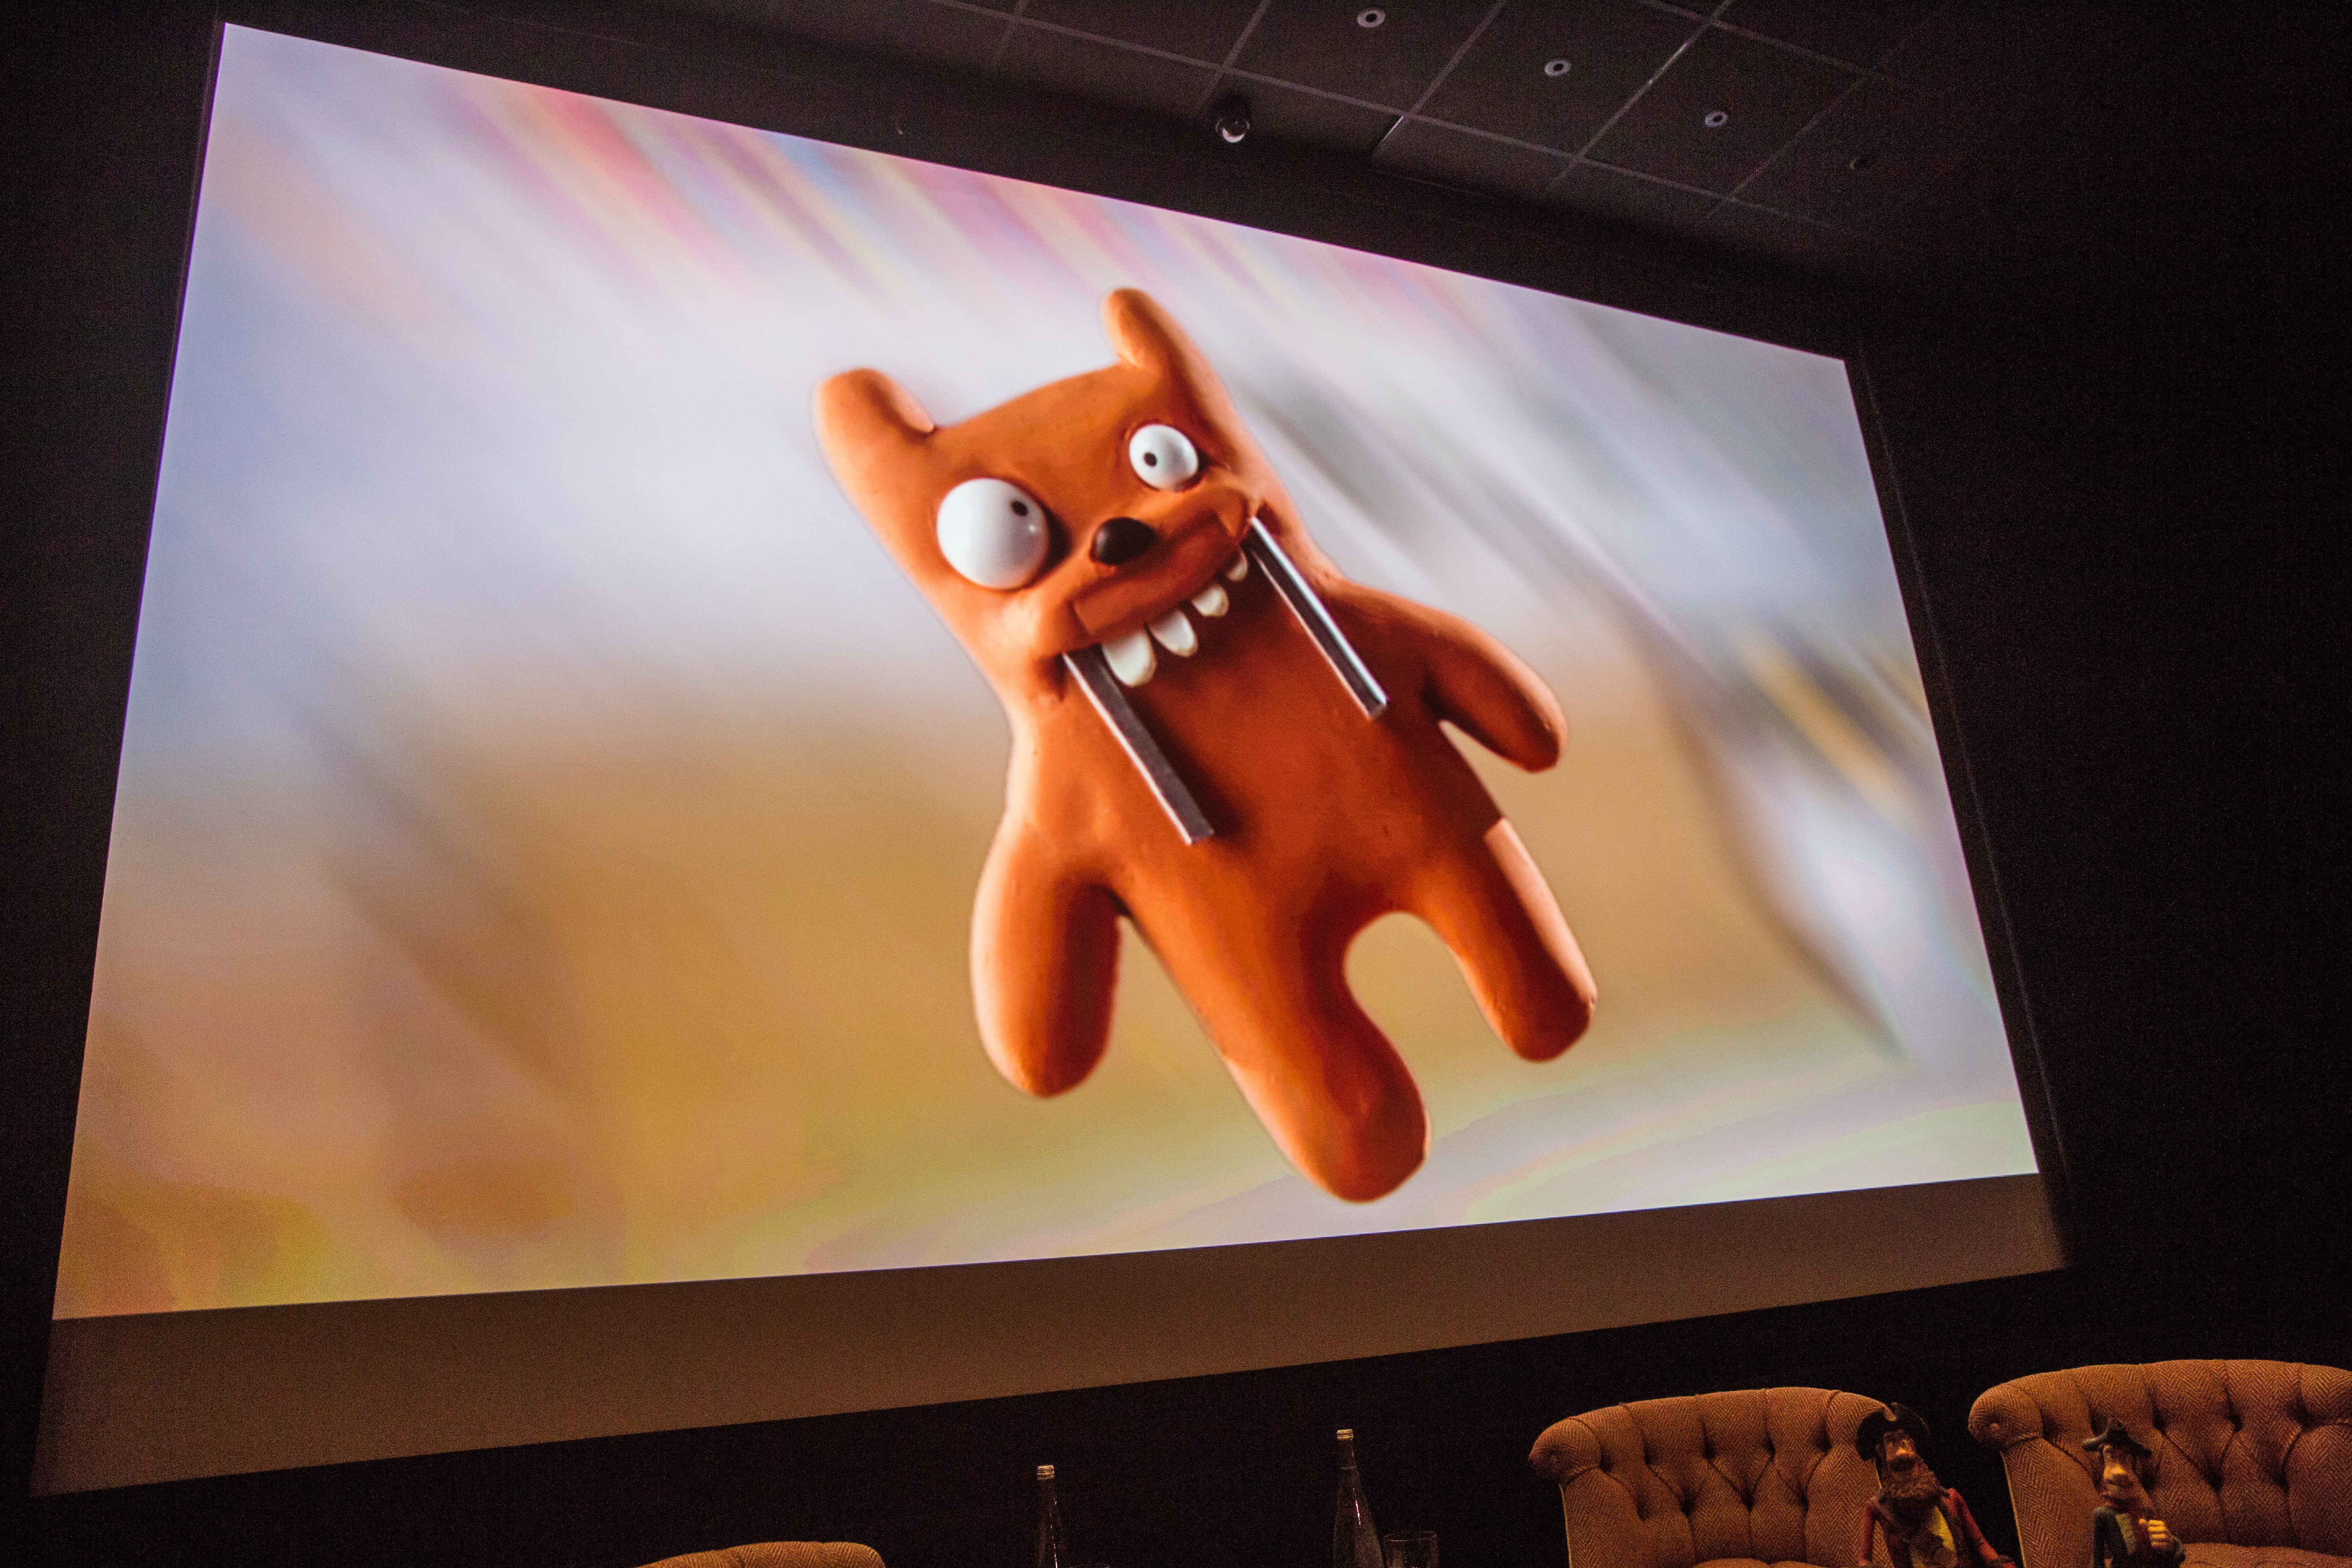 An evening with Aardman, The Soho Hotel, London events photographer